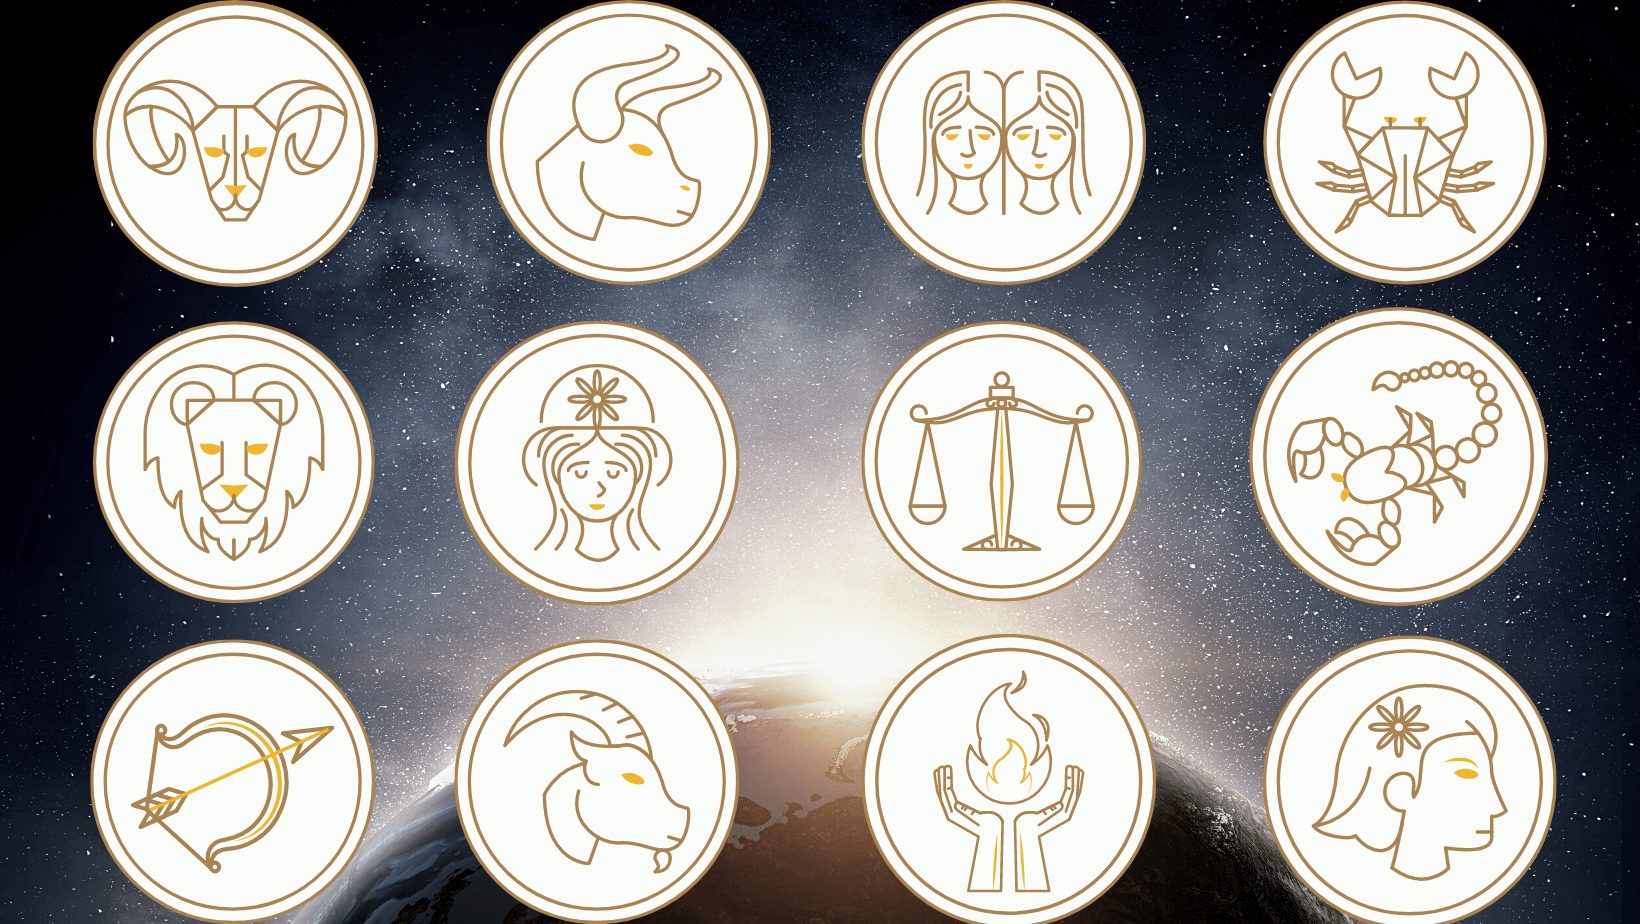 Sep Horoscope Overview